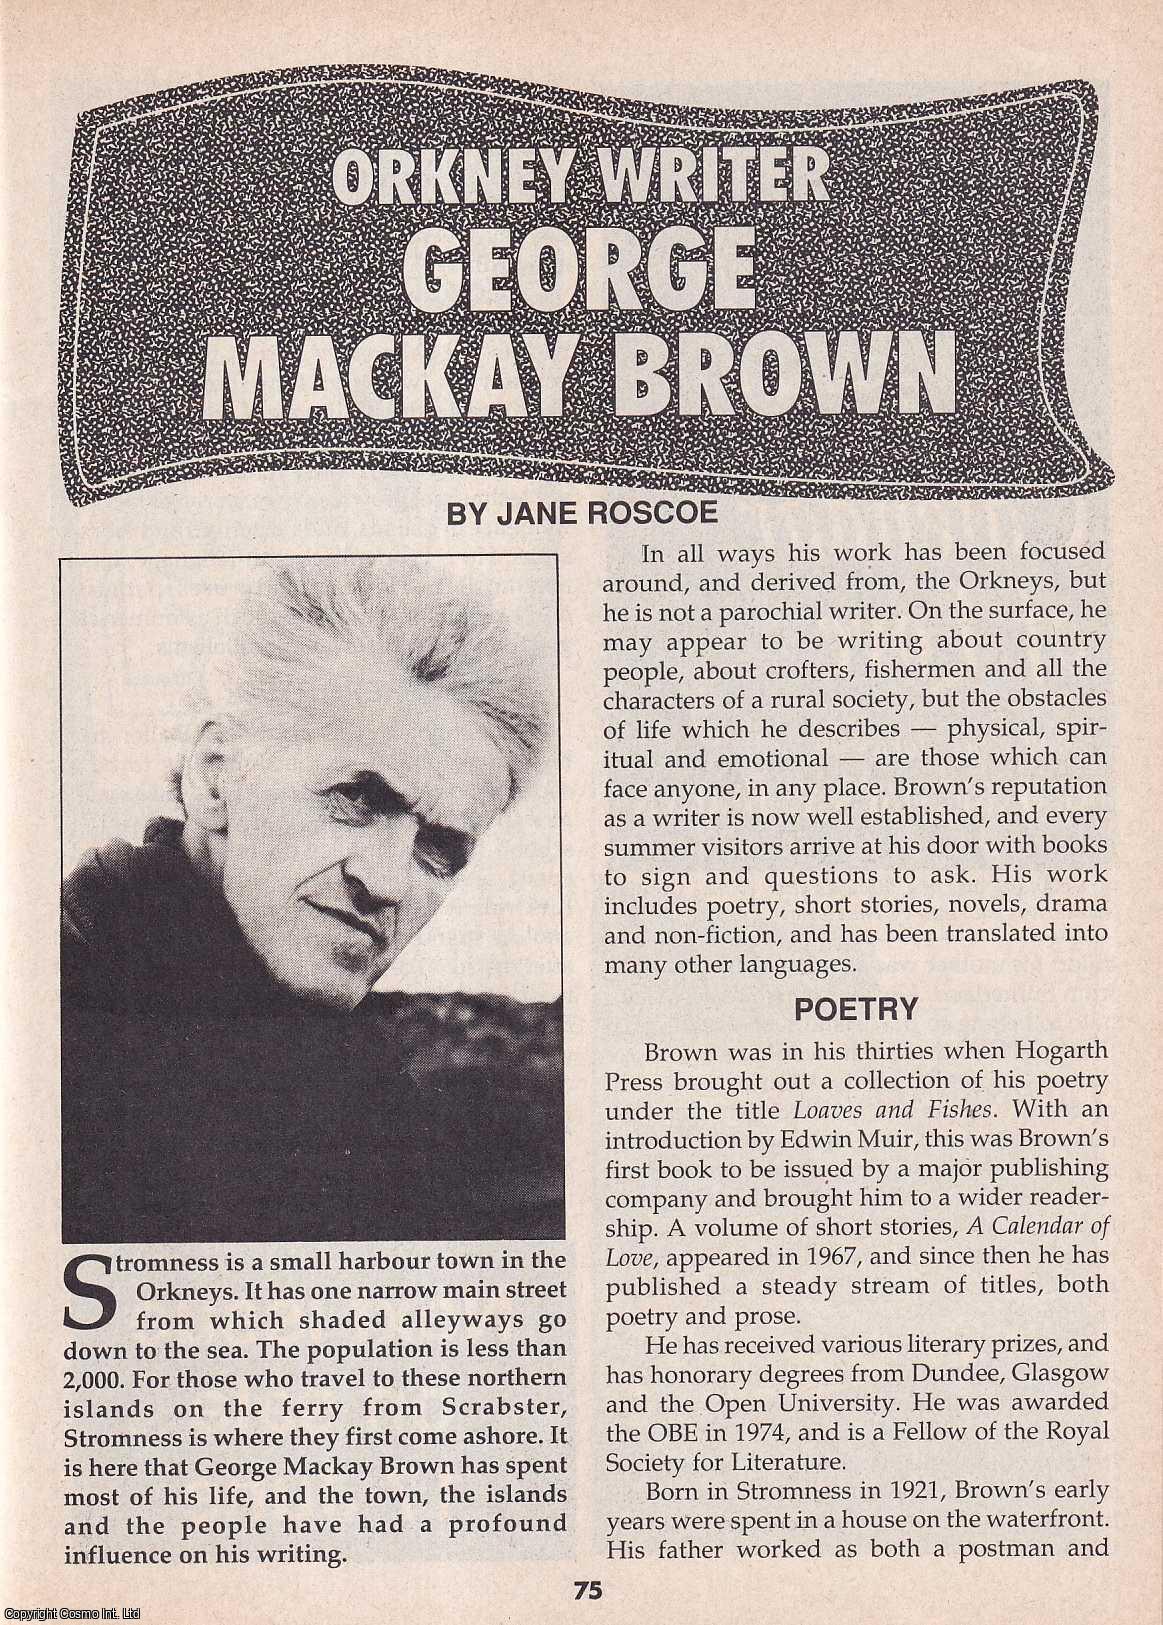 Jane Roscoe - Orkney Writer George Mackay Brown. This is an original article separated from an issue of The Book & Magazine Collector publication.